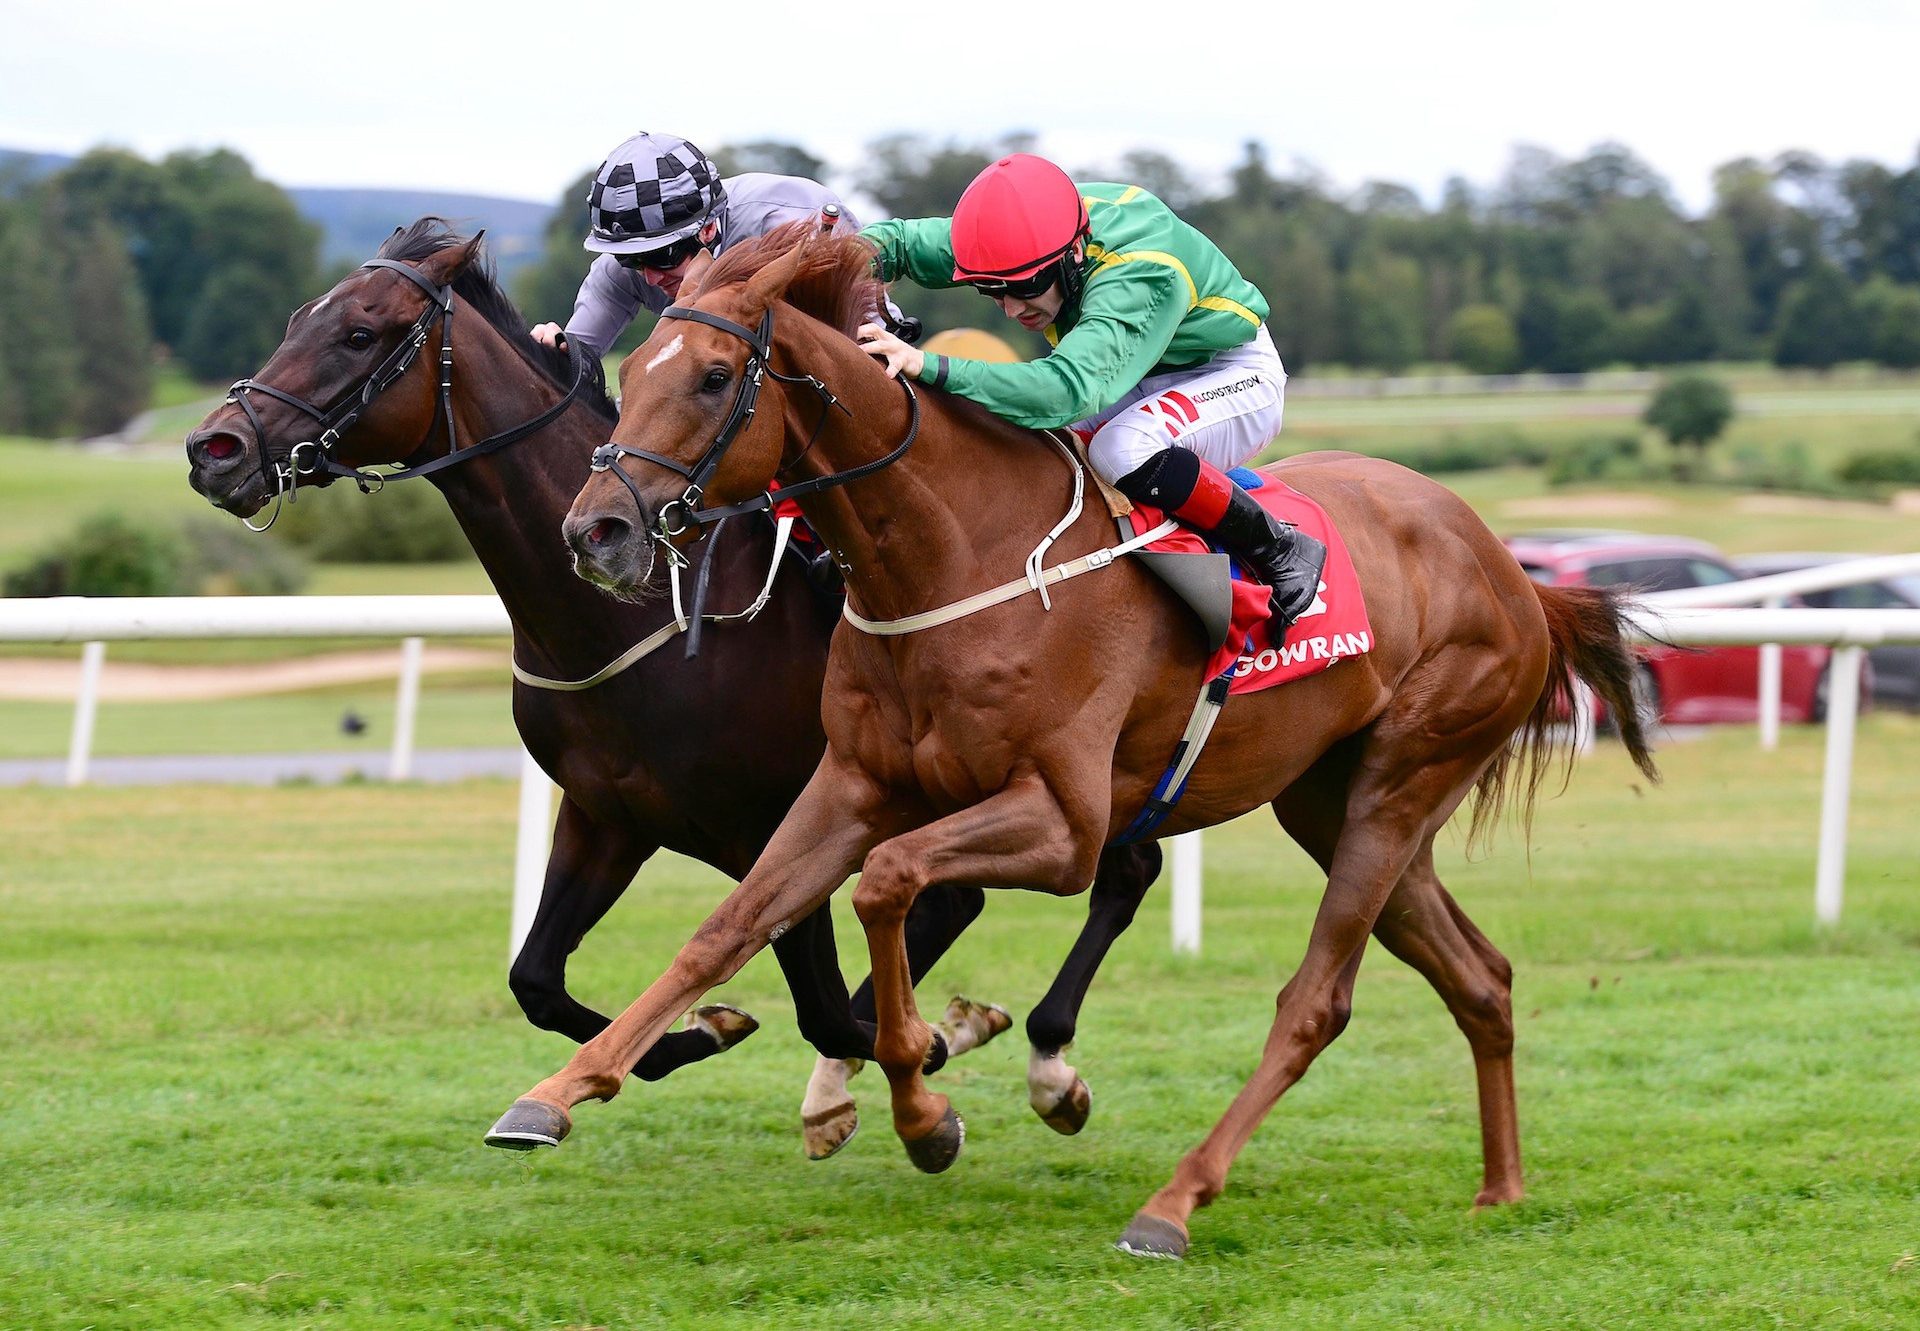 Long Arm Becomes The Latest Winner By Rock Of Gibraltar